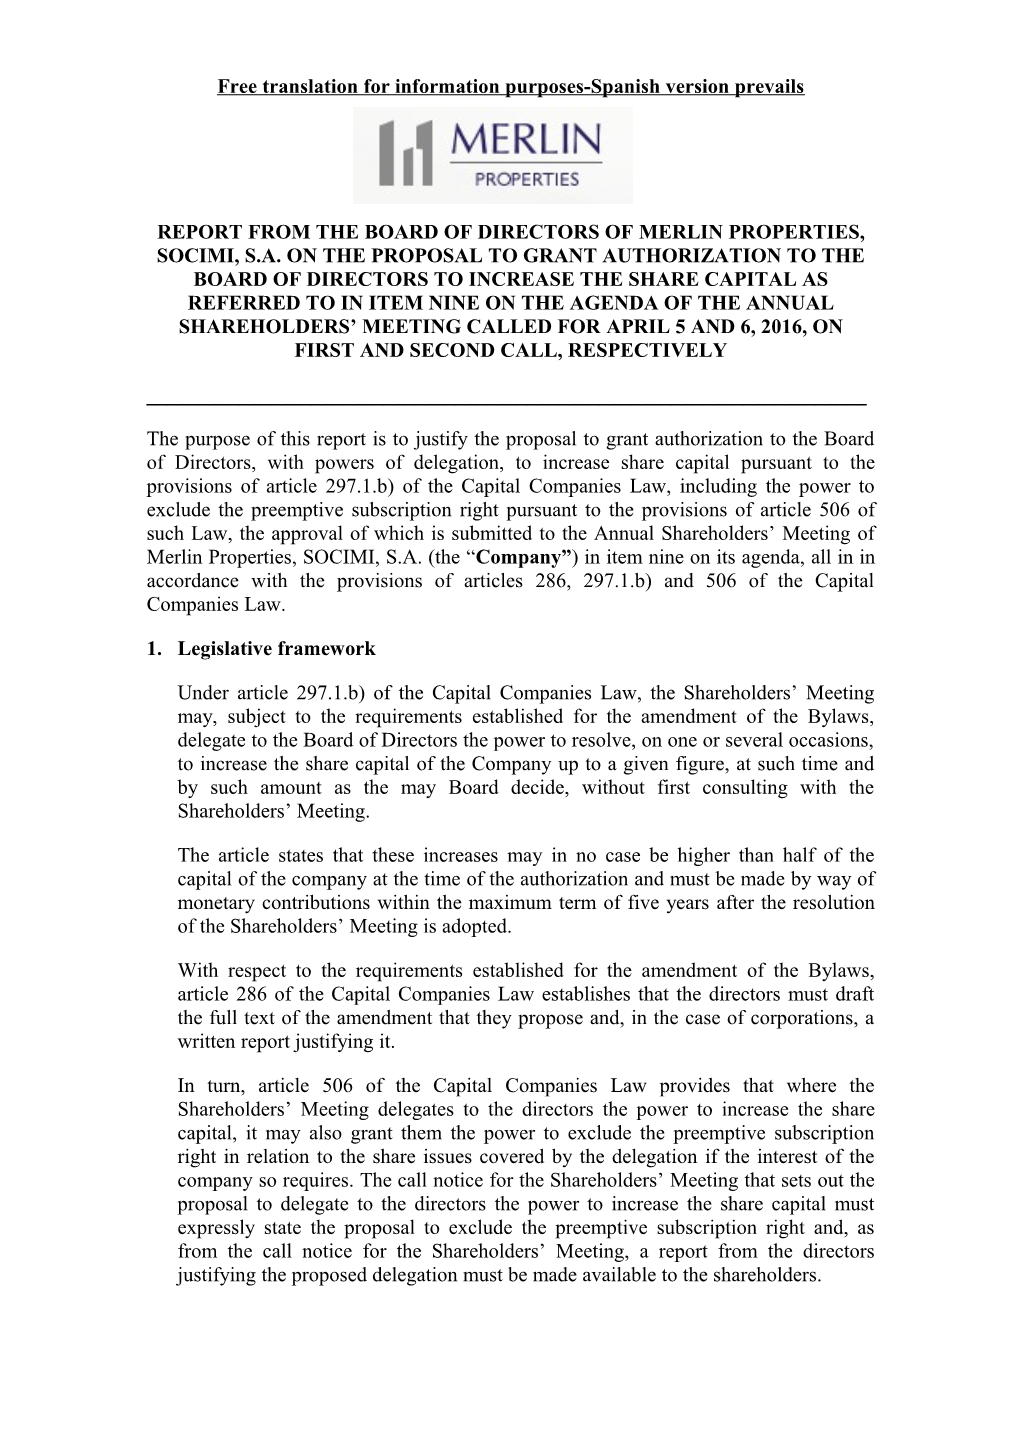 Report from the Board of Directors of Merlin Properties, Socimi, S.A. on the Proposal